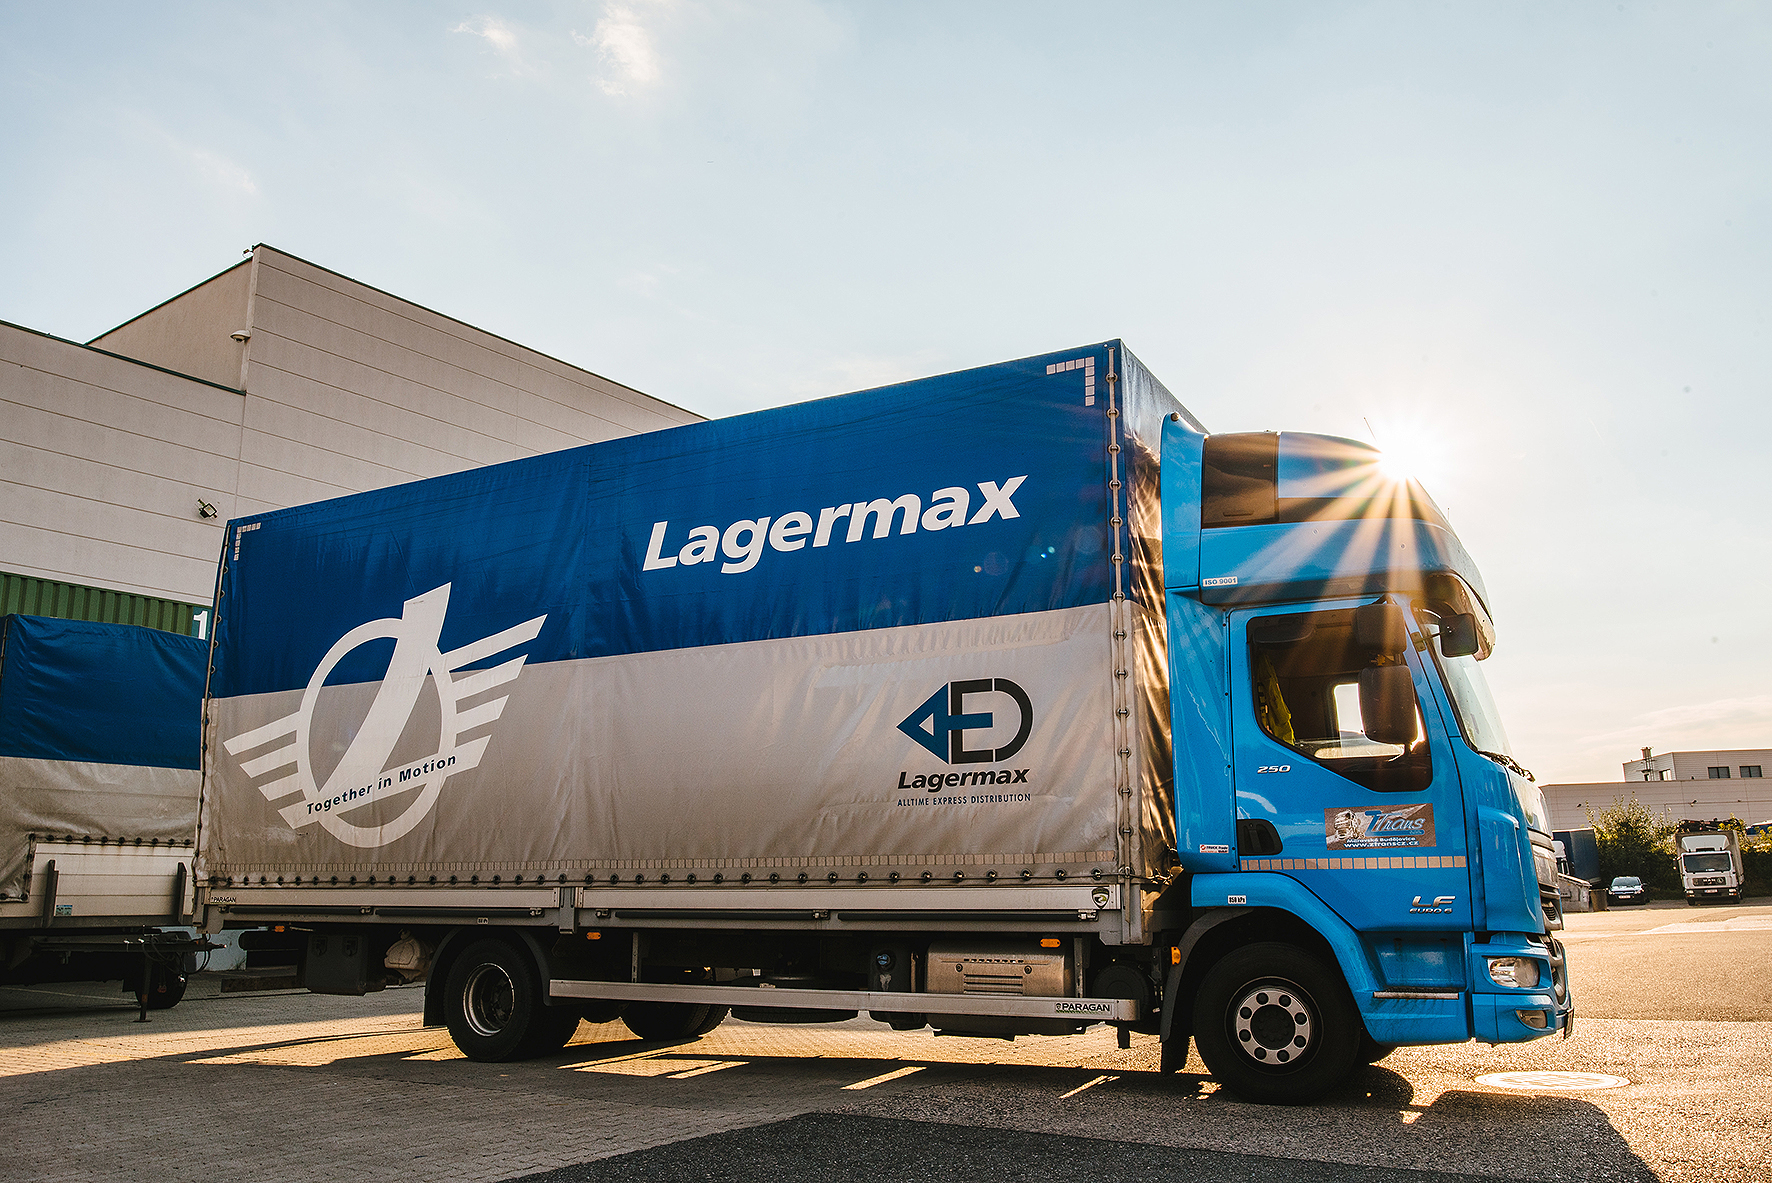 Lagermax AED is growing with continuous innovations